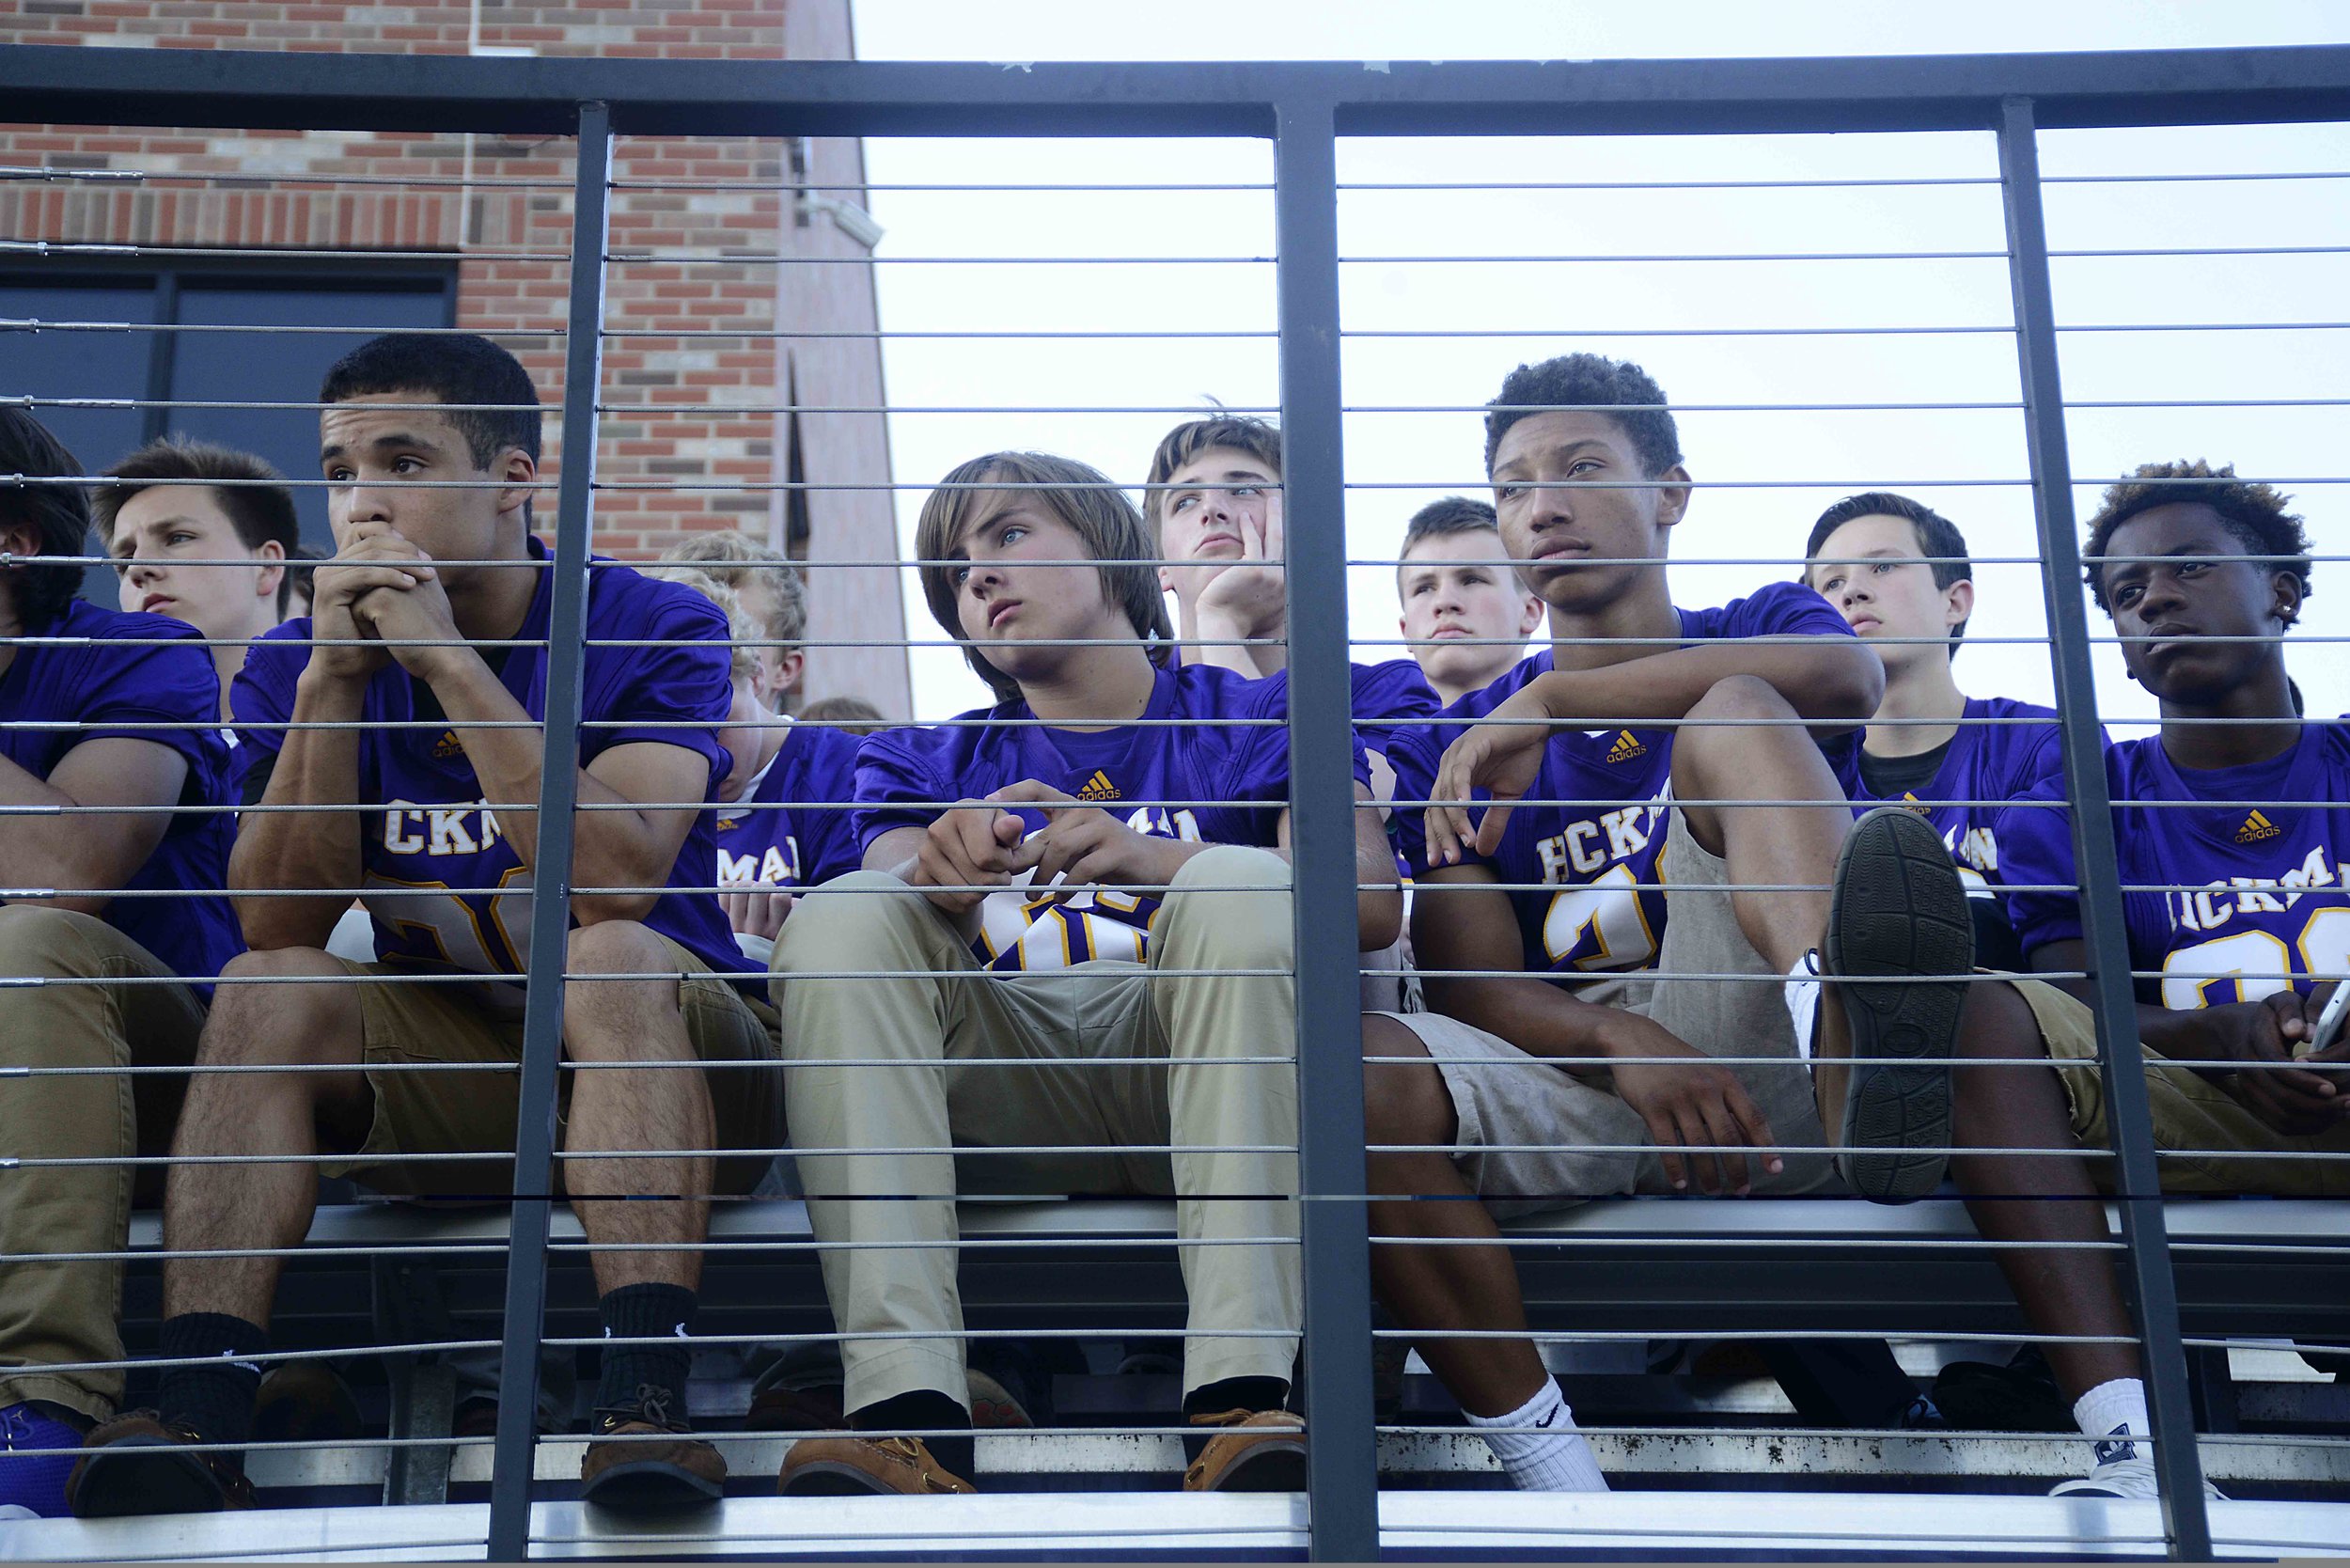  Members of the Hickman High School football team look towards the podium during the memorial service for their late coach Arnel Monroe at Alumni Stadium on Thursday, June 9, 2016. "I was raised in foster care. Coach let me know that this was my fami